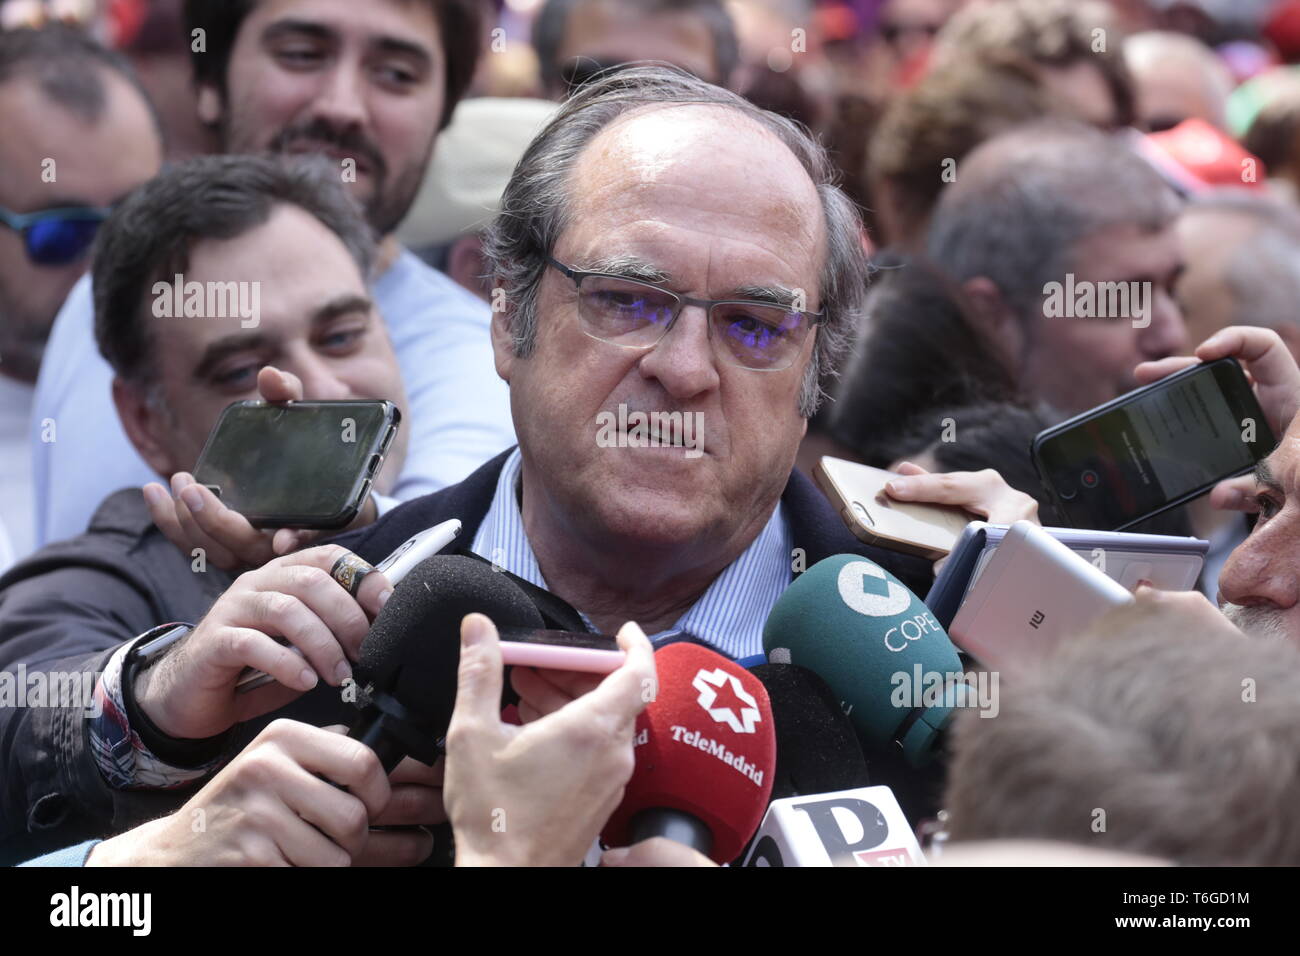 Madrid, Spain. 1st May, 2019. ngel Gabilondo, candidate for the presidency of the Madrid region seen speaking to the media during the protest.Thousands of protesters demonstrate on the International Workers' Day convoked by the majority unions UGT and CCOO to demand policies and reductions in unemployment levels in Spain, against job insecurity and labour rights. Politicians of the PSOE and Podemos have participated in the demonstration. Credit: Lito Lizana/SOPA Images/ZUMA Wire/Alamy Live News Stock Photo